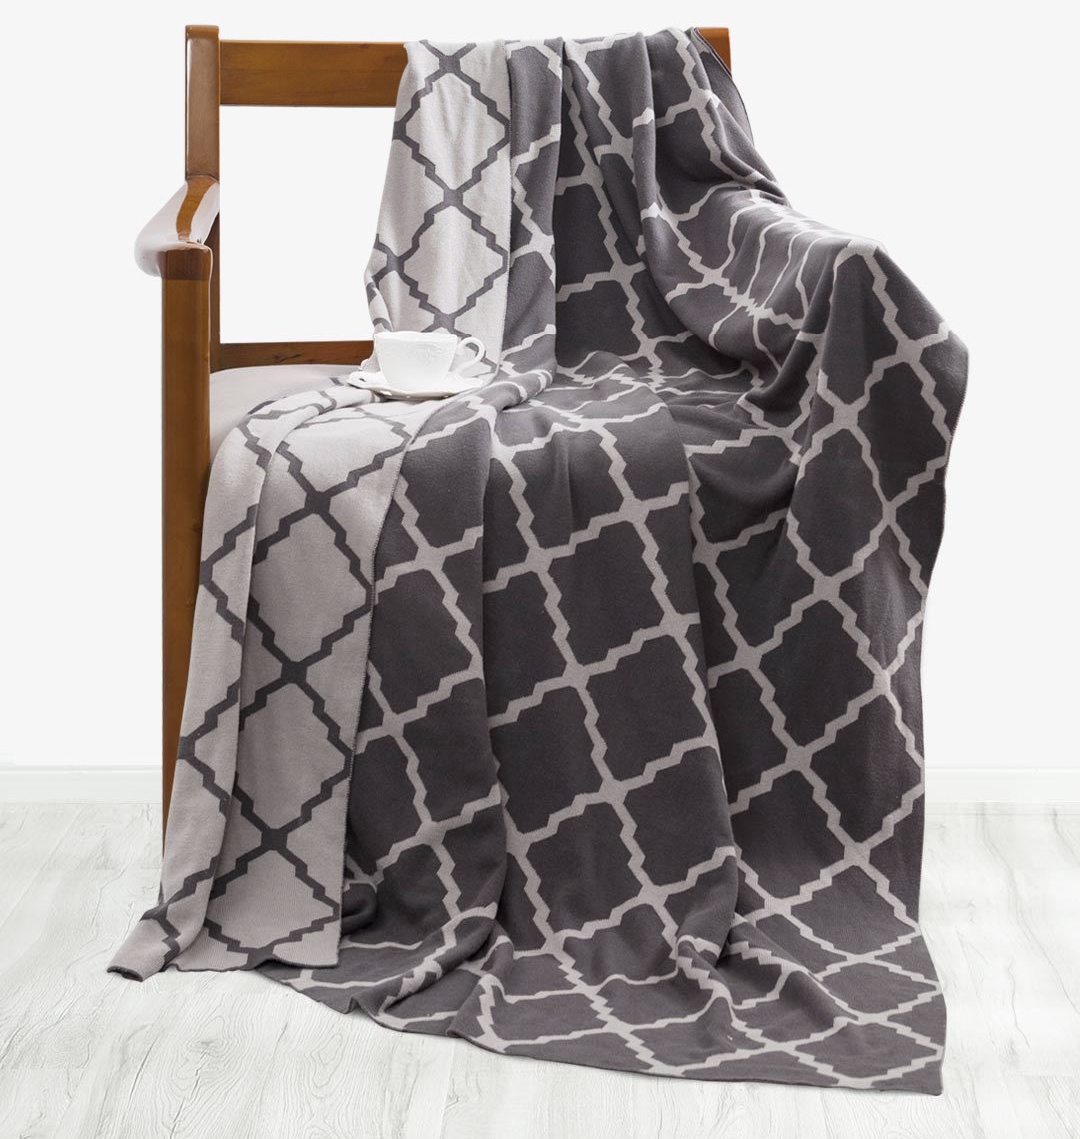 Tonight-Combed-cotton-knit-blanket-Grey